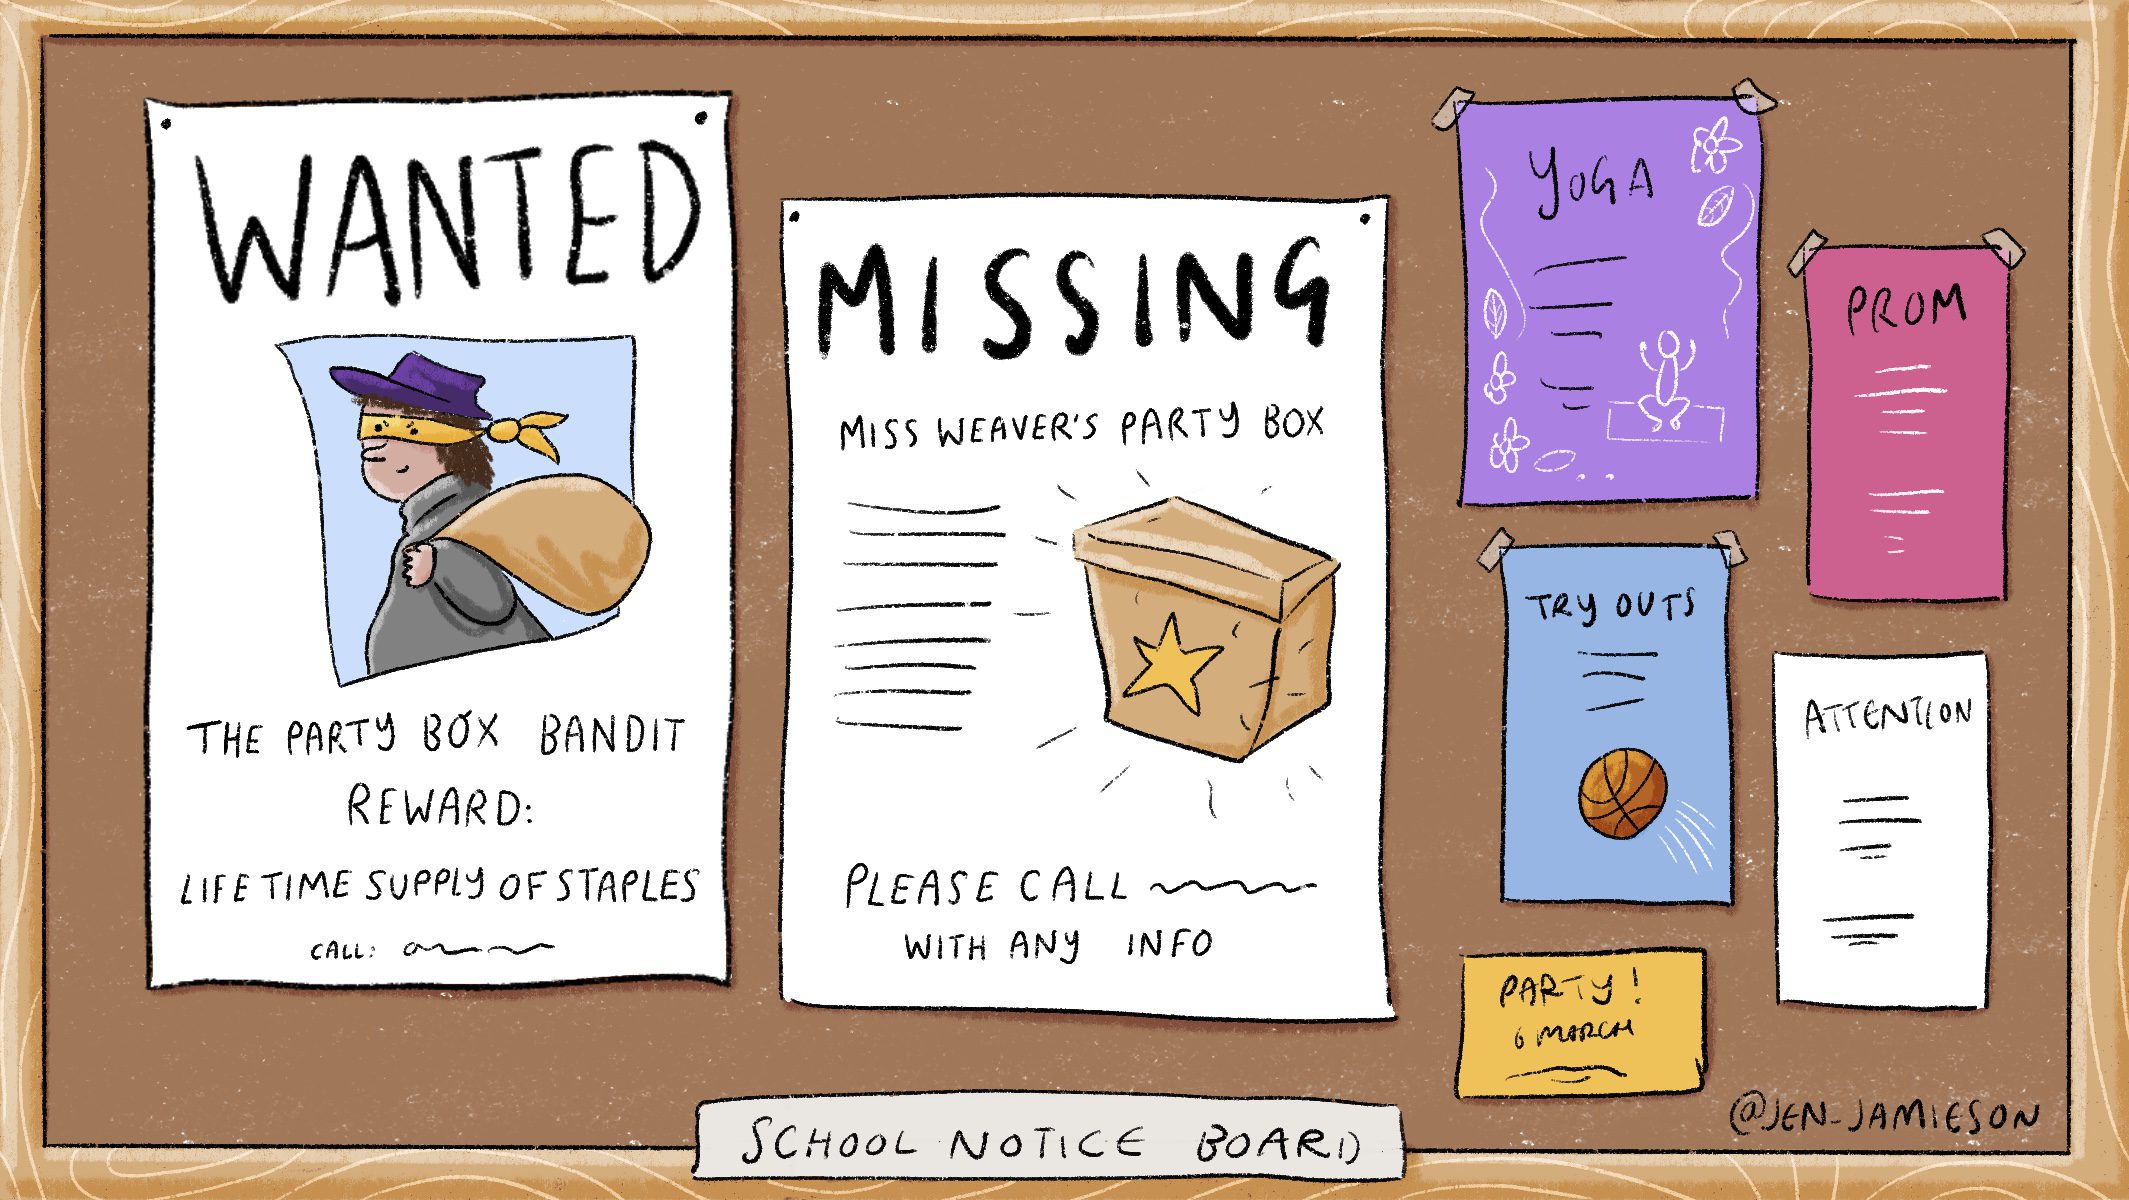 Illustration of bulletin board with Wanted and Missing posters